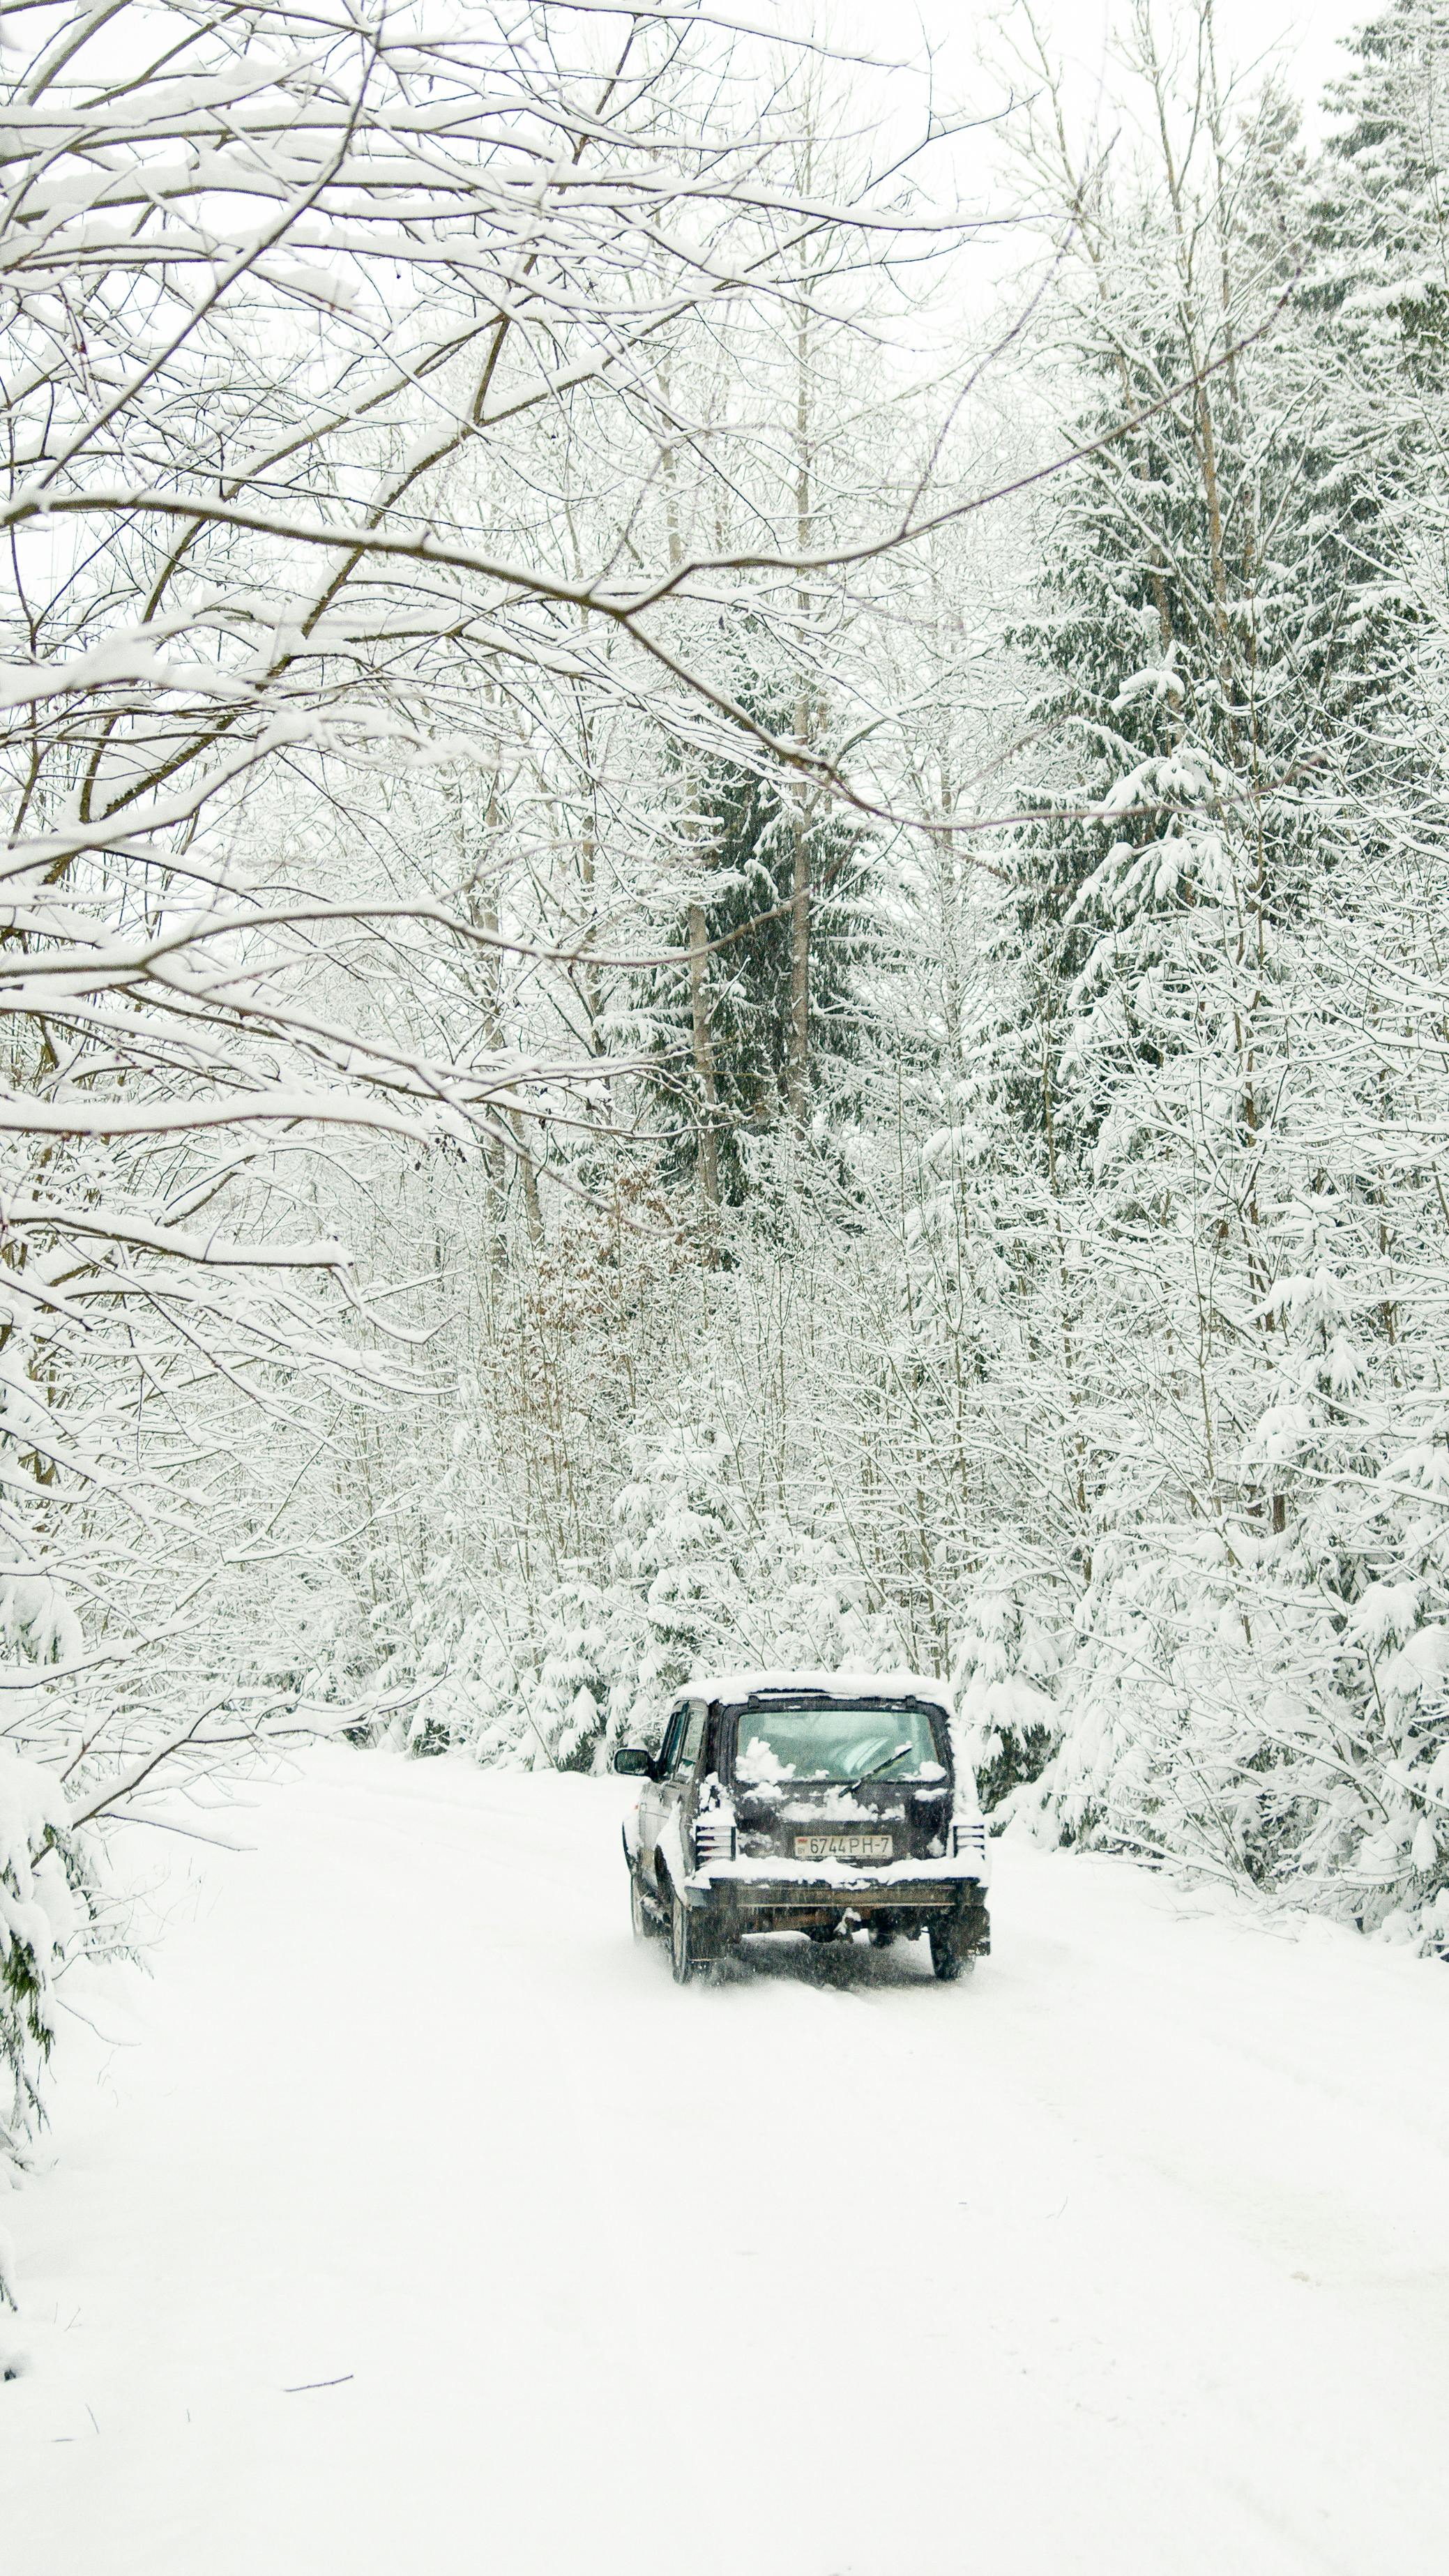 Driving in Winter Weather: Tips for Safe and Prepared Travel